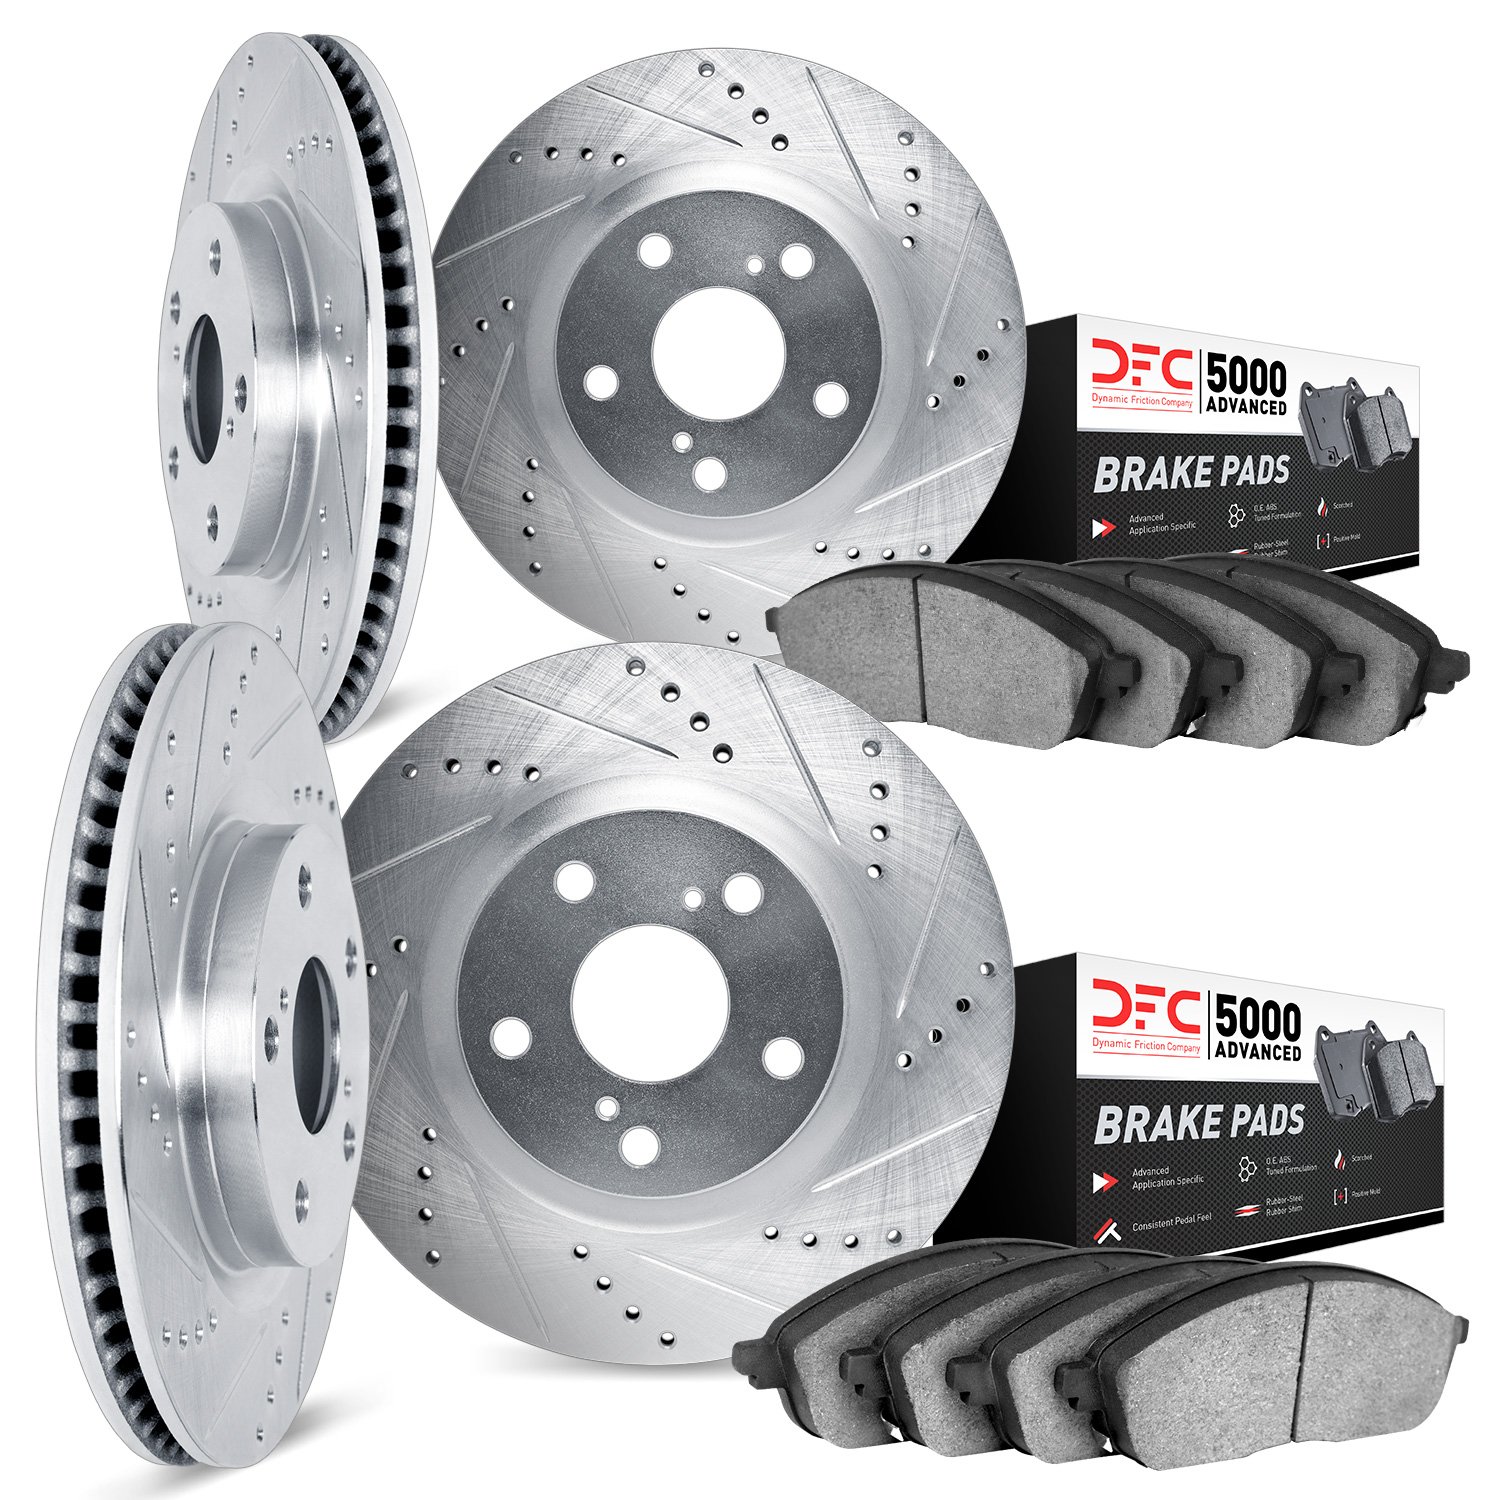 7504-54274 Drilled/Slotted Brake Rotors w/5000 Advanced Brake Pads Kit [Silver], 1994-2004 Ford/Lincoln/Mercury/Mazda, Position: